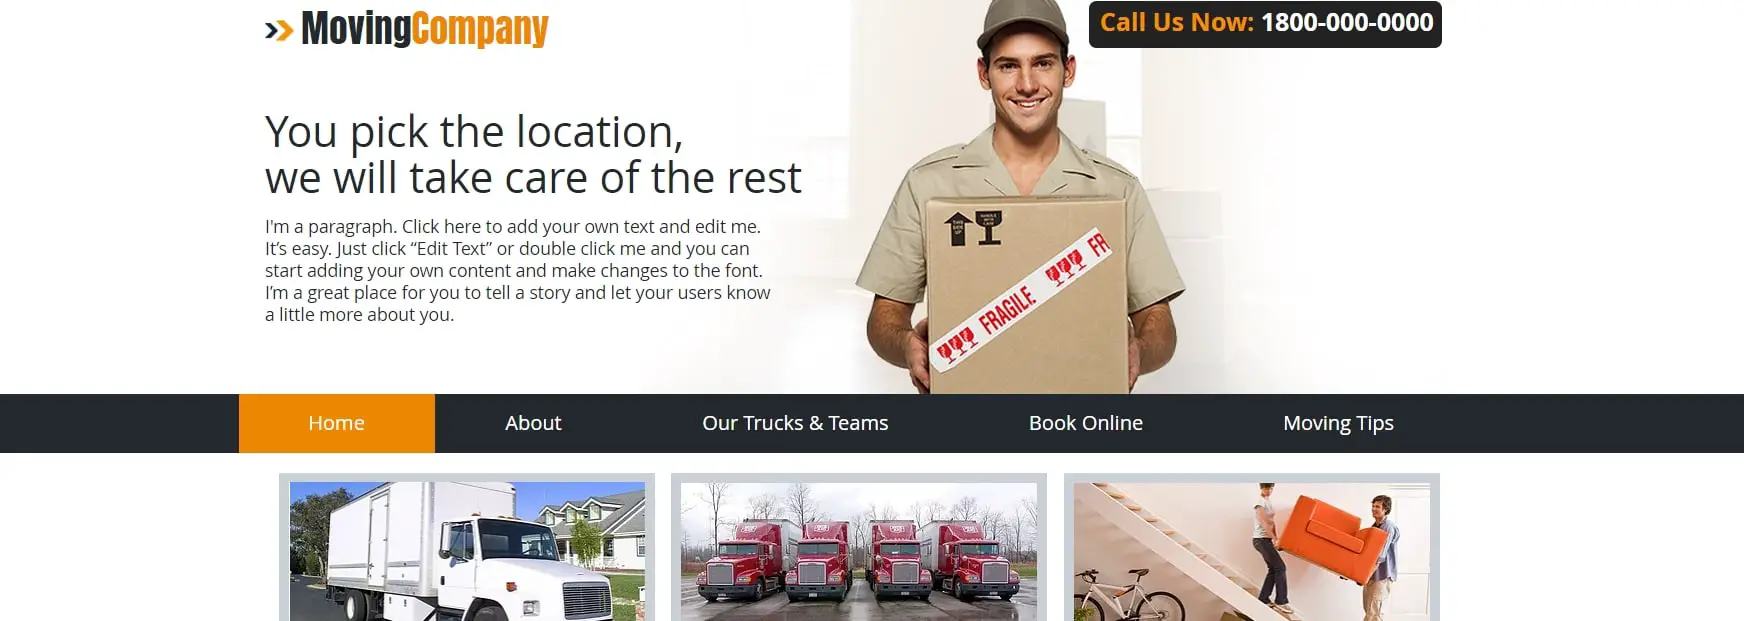 Moving Company Template